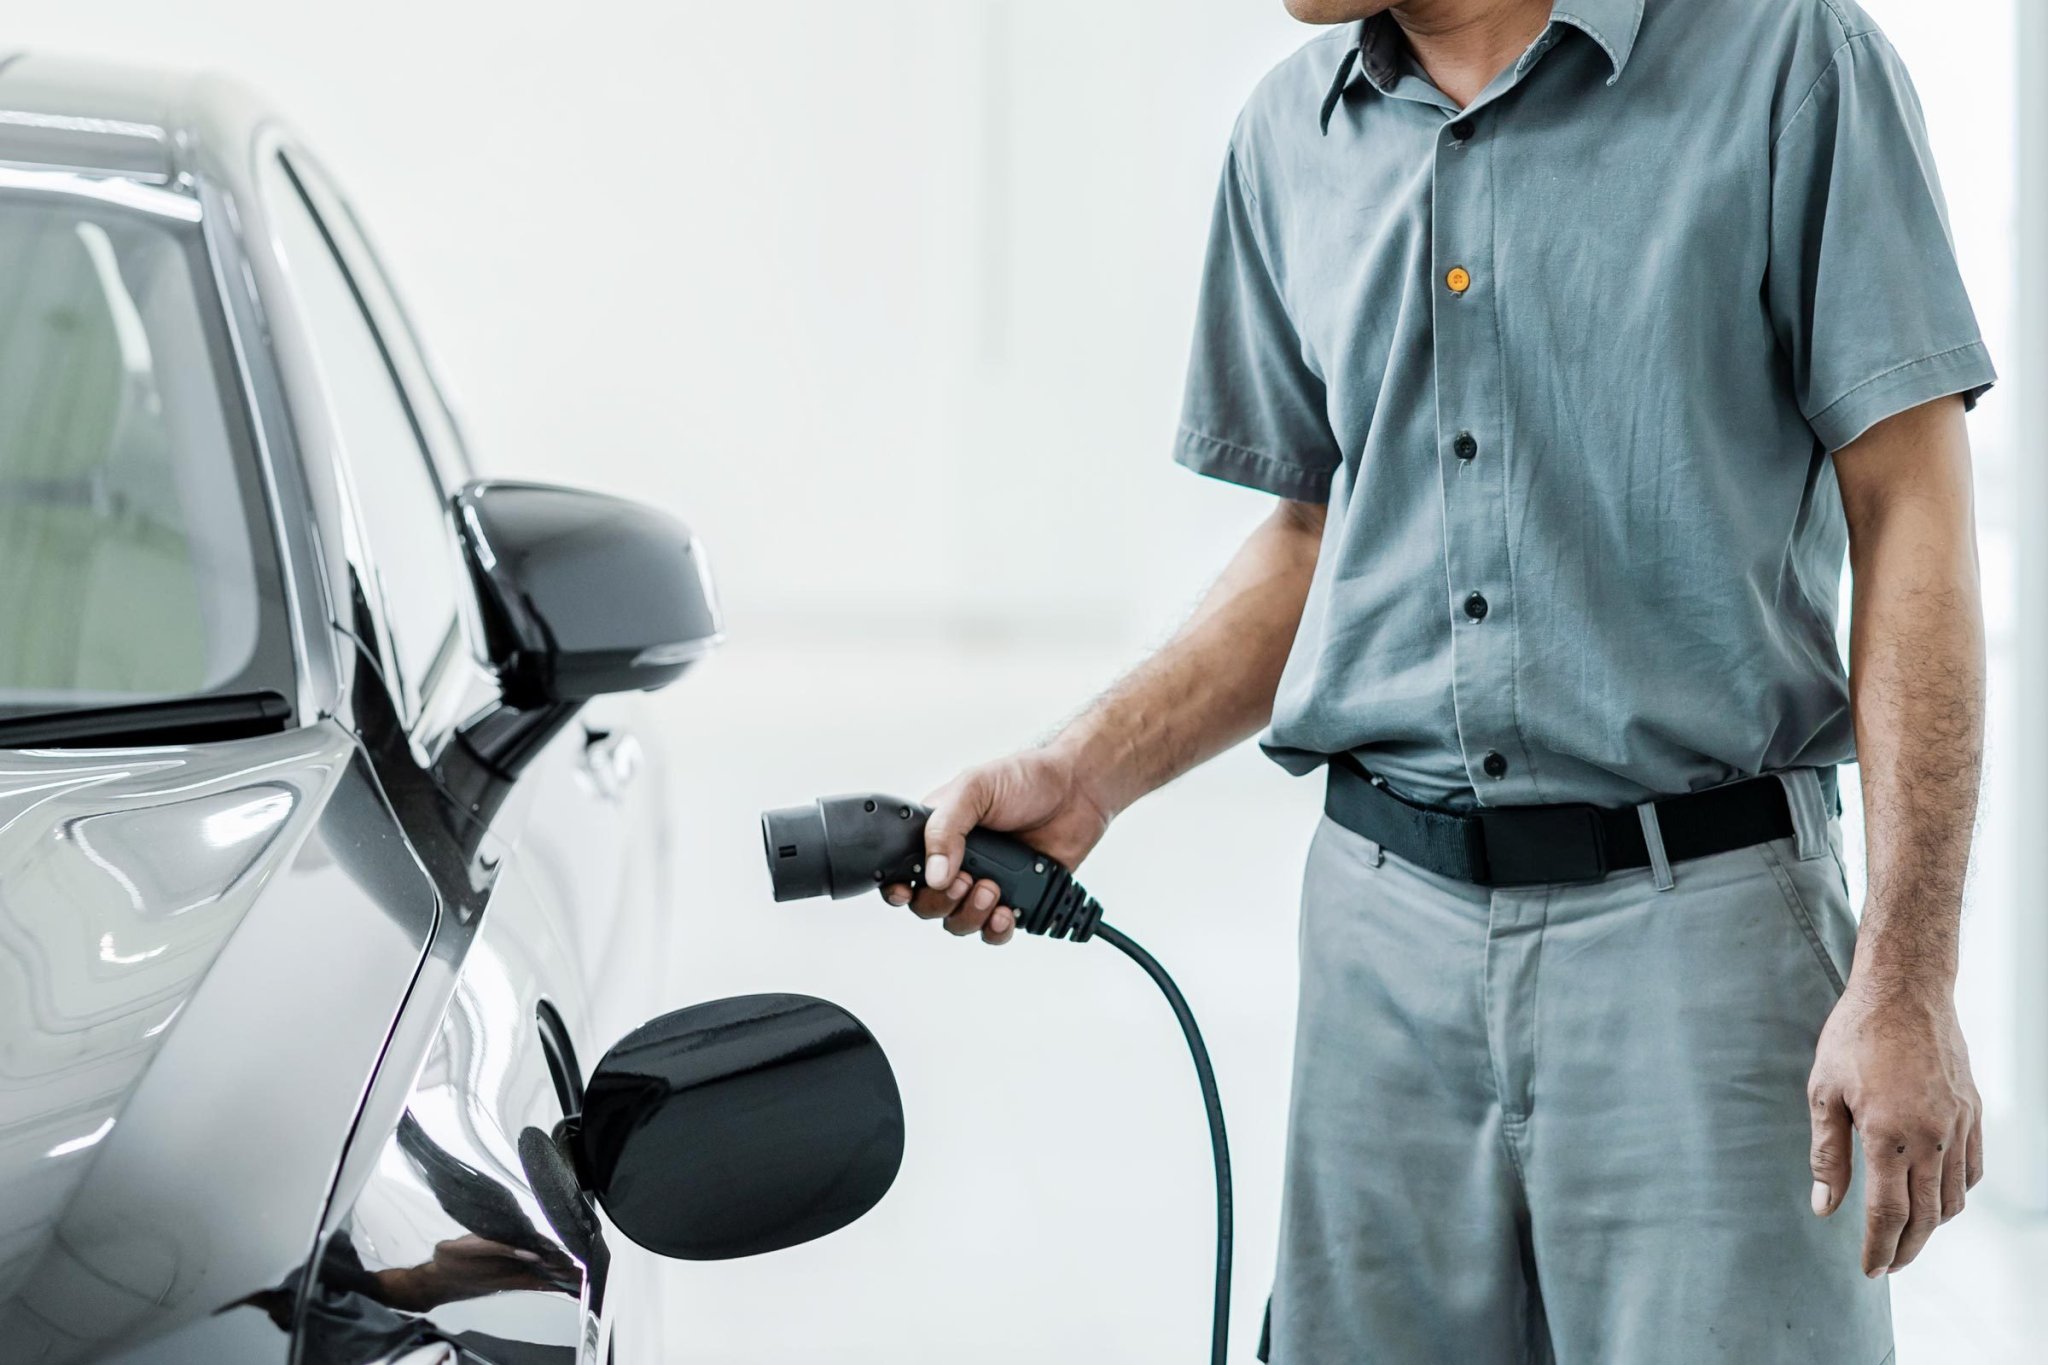 How To Prepare Your Garage for an Electric Vehicle